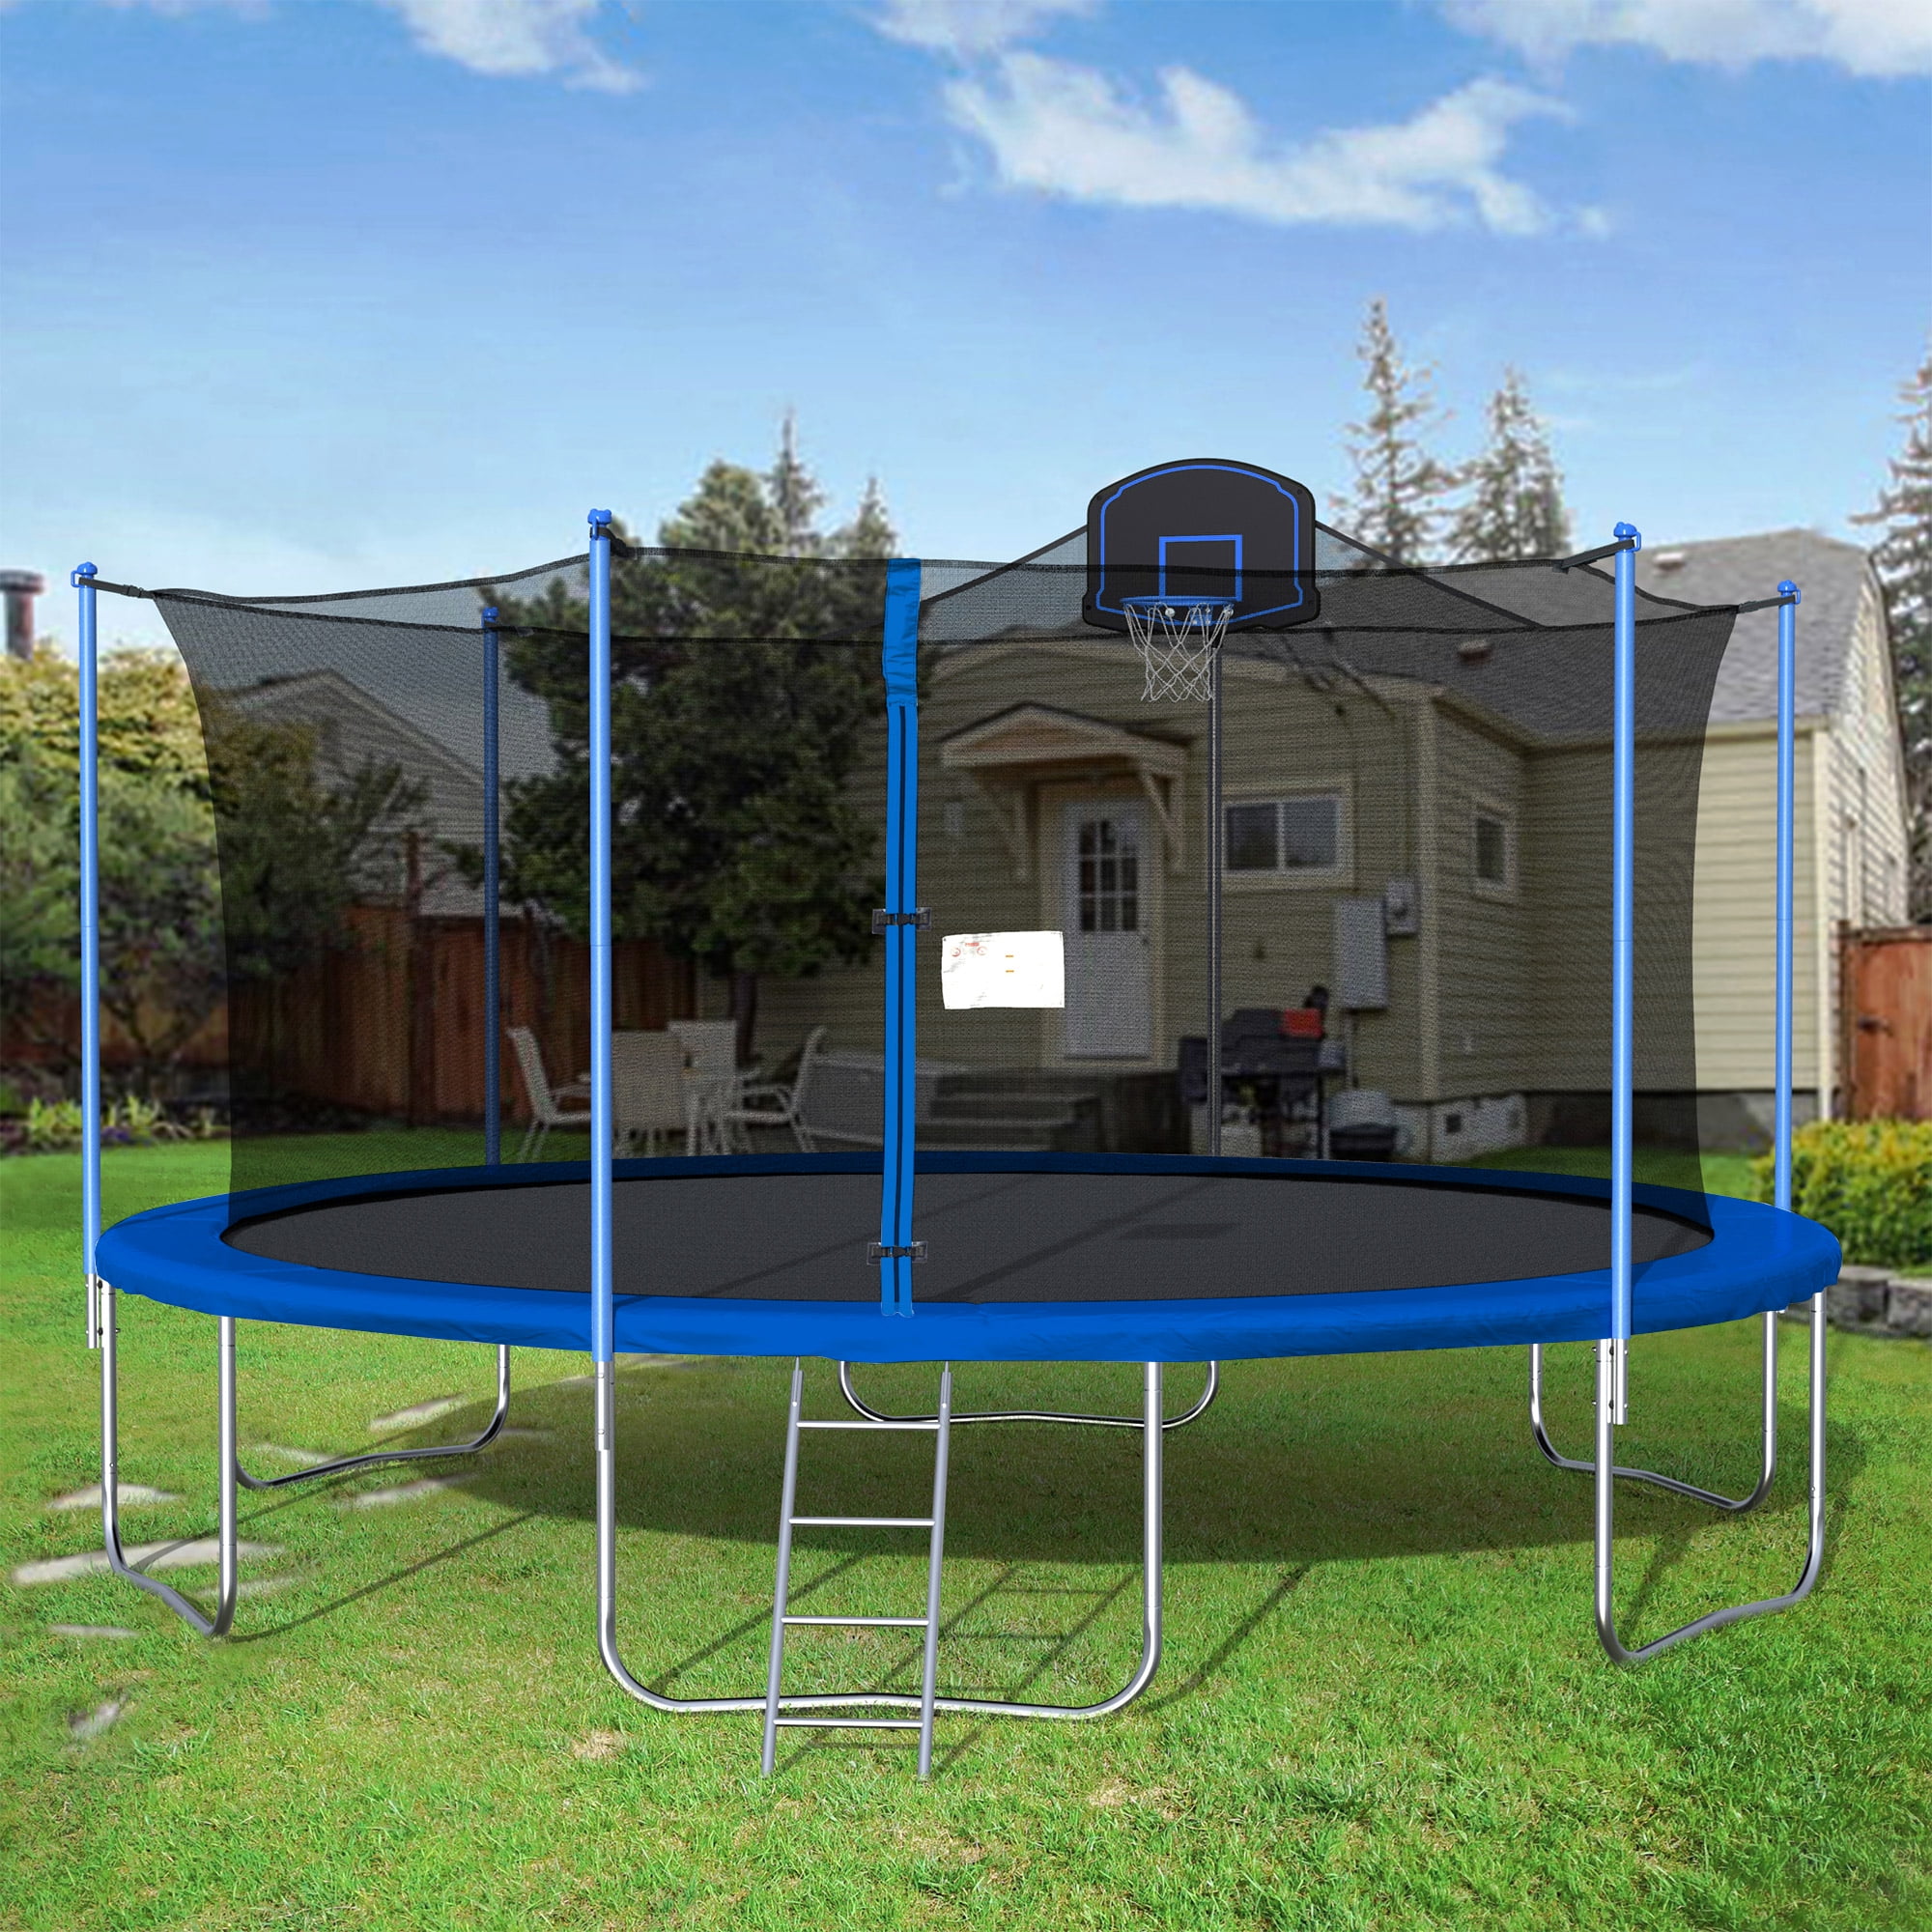 16FT Trampoline, 2021 Upgraded Outdoor Round Trampoline with Safety Enclosure, Basketball Hoop and Ladder, Outdoor Trampoline for Family School Entertainment, Heavy Duty Frame and Coiled Spring, B5005